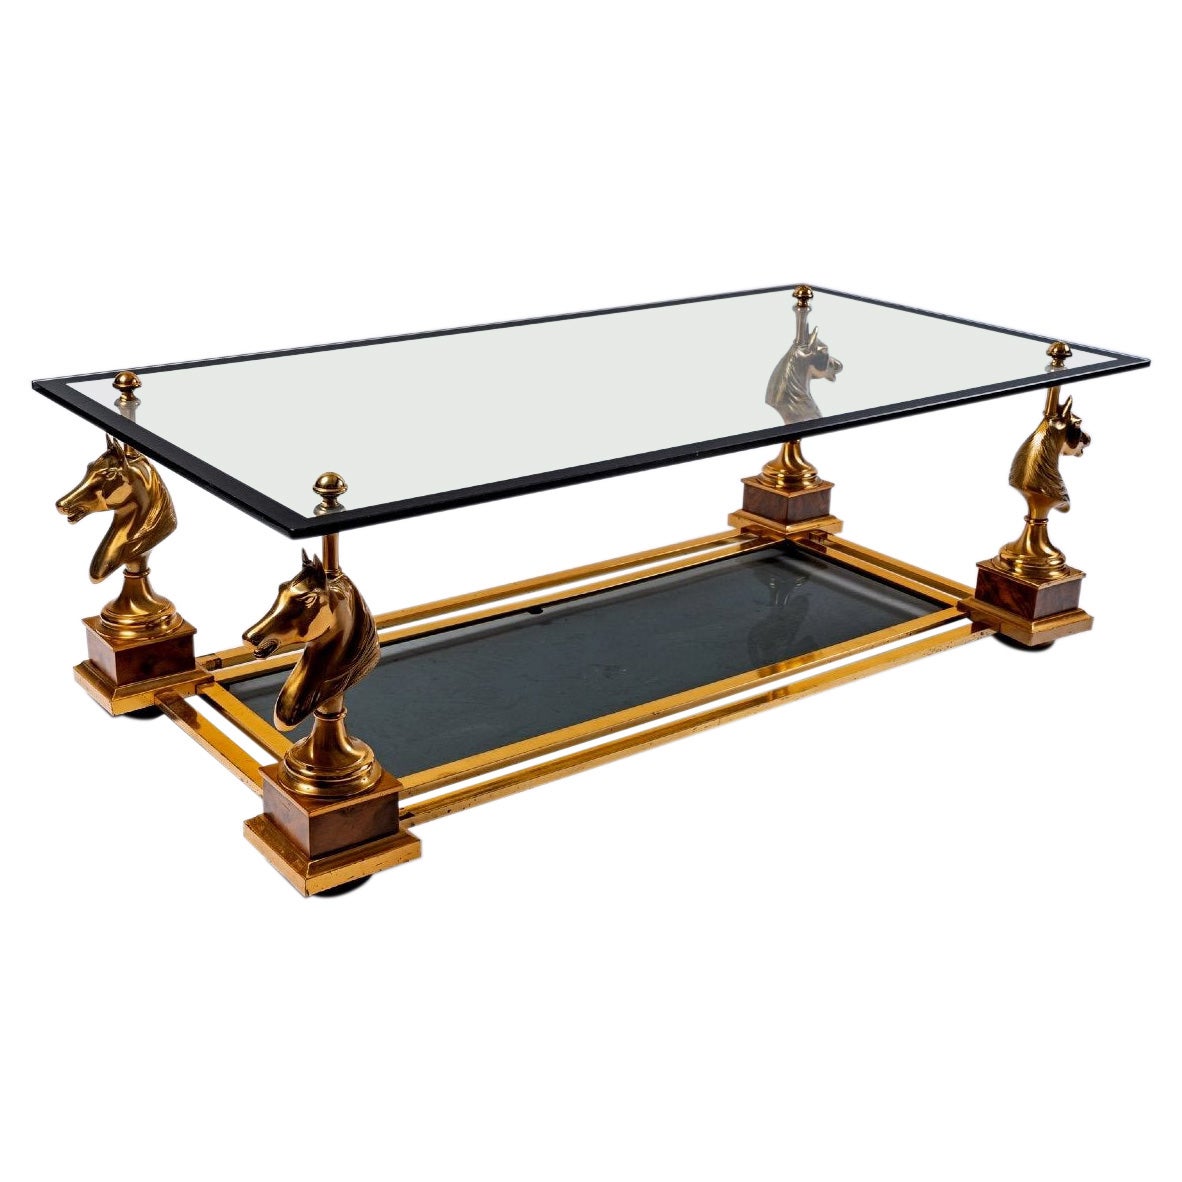 Glass and Gilt Bronze Cheval Coffee Table, Maison Charles, 20th Century